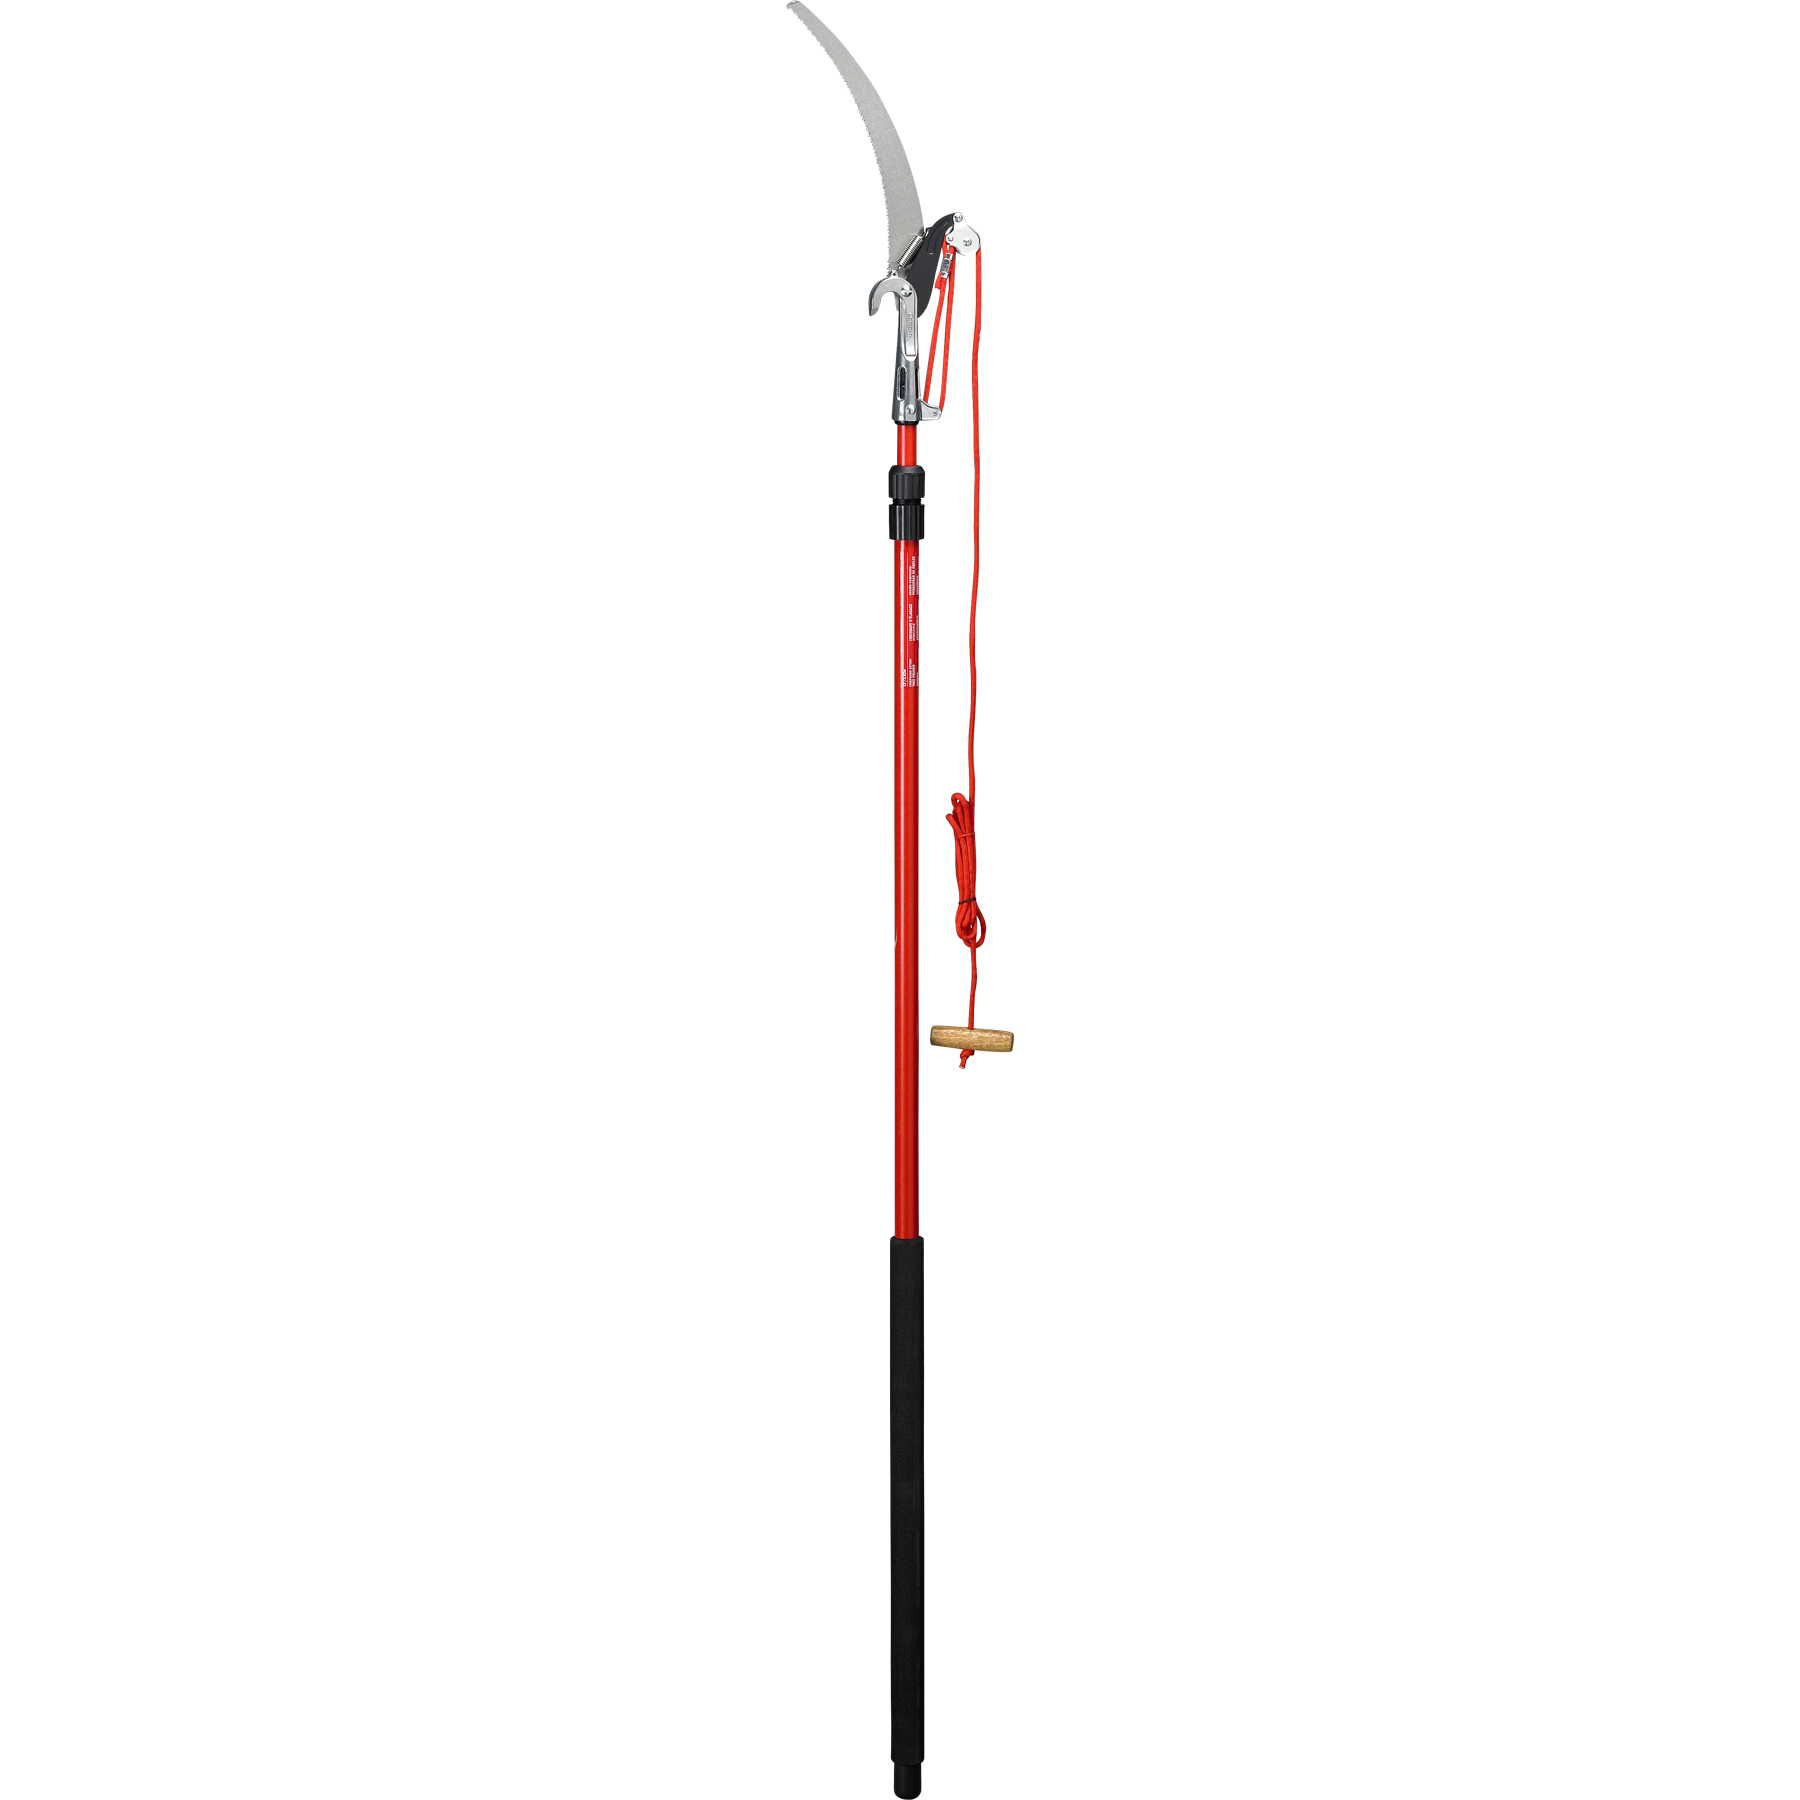 Corona Dual Compound-Action Tree Pruner - 6-12 Foot - image 1 of 4